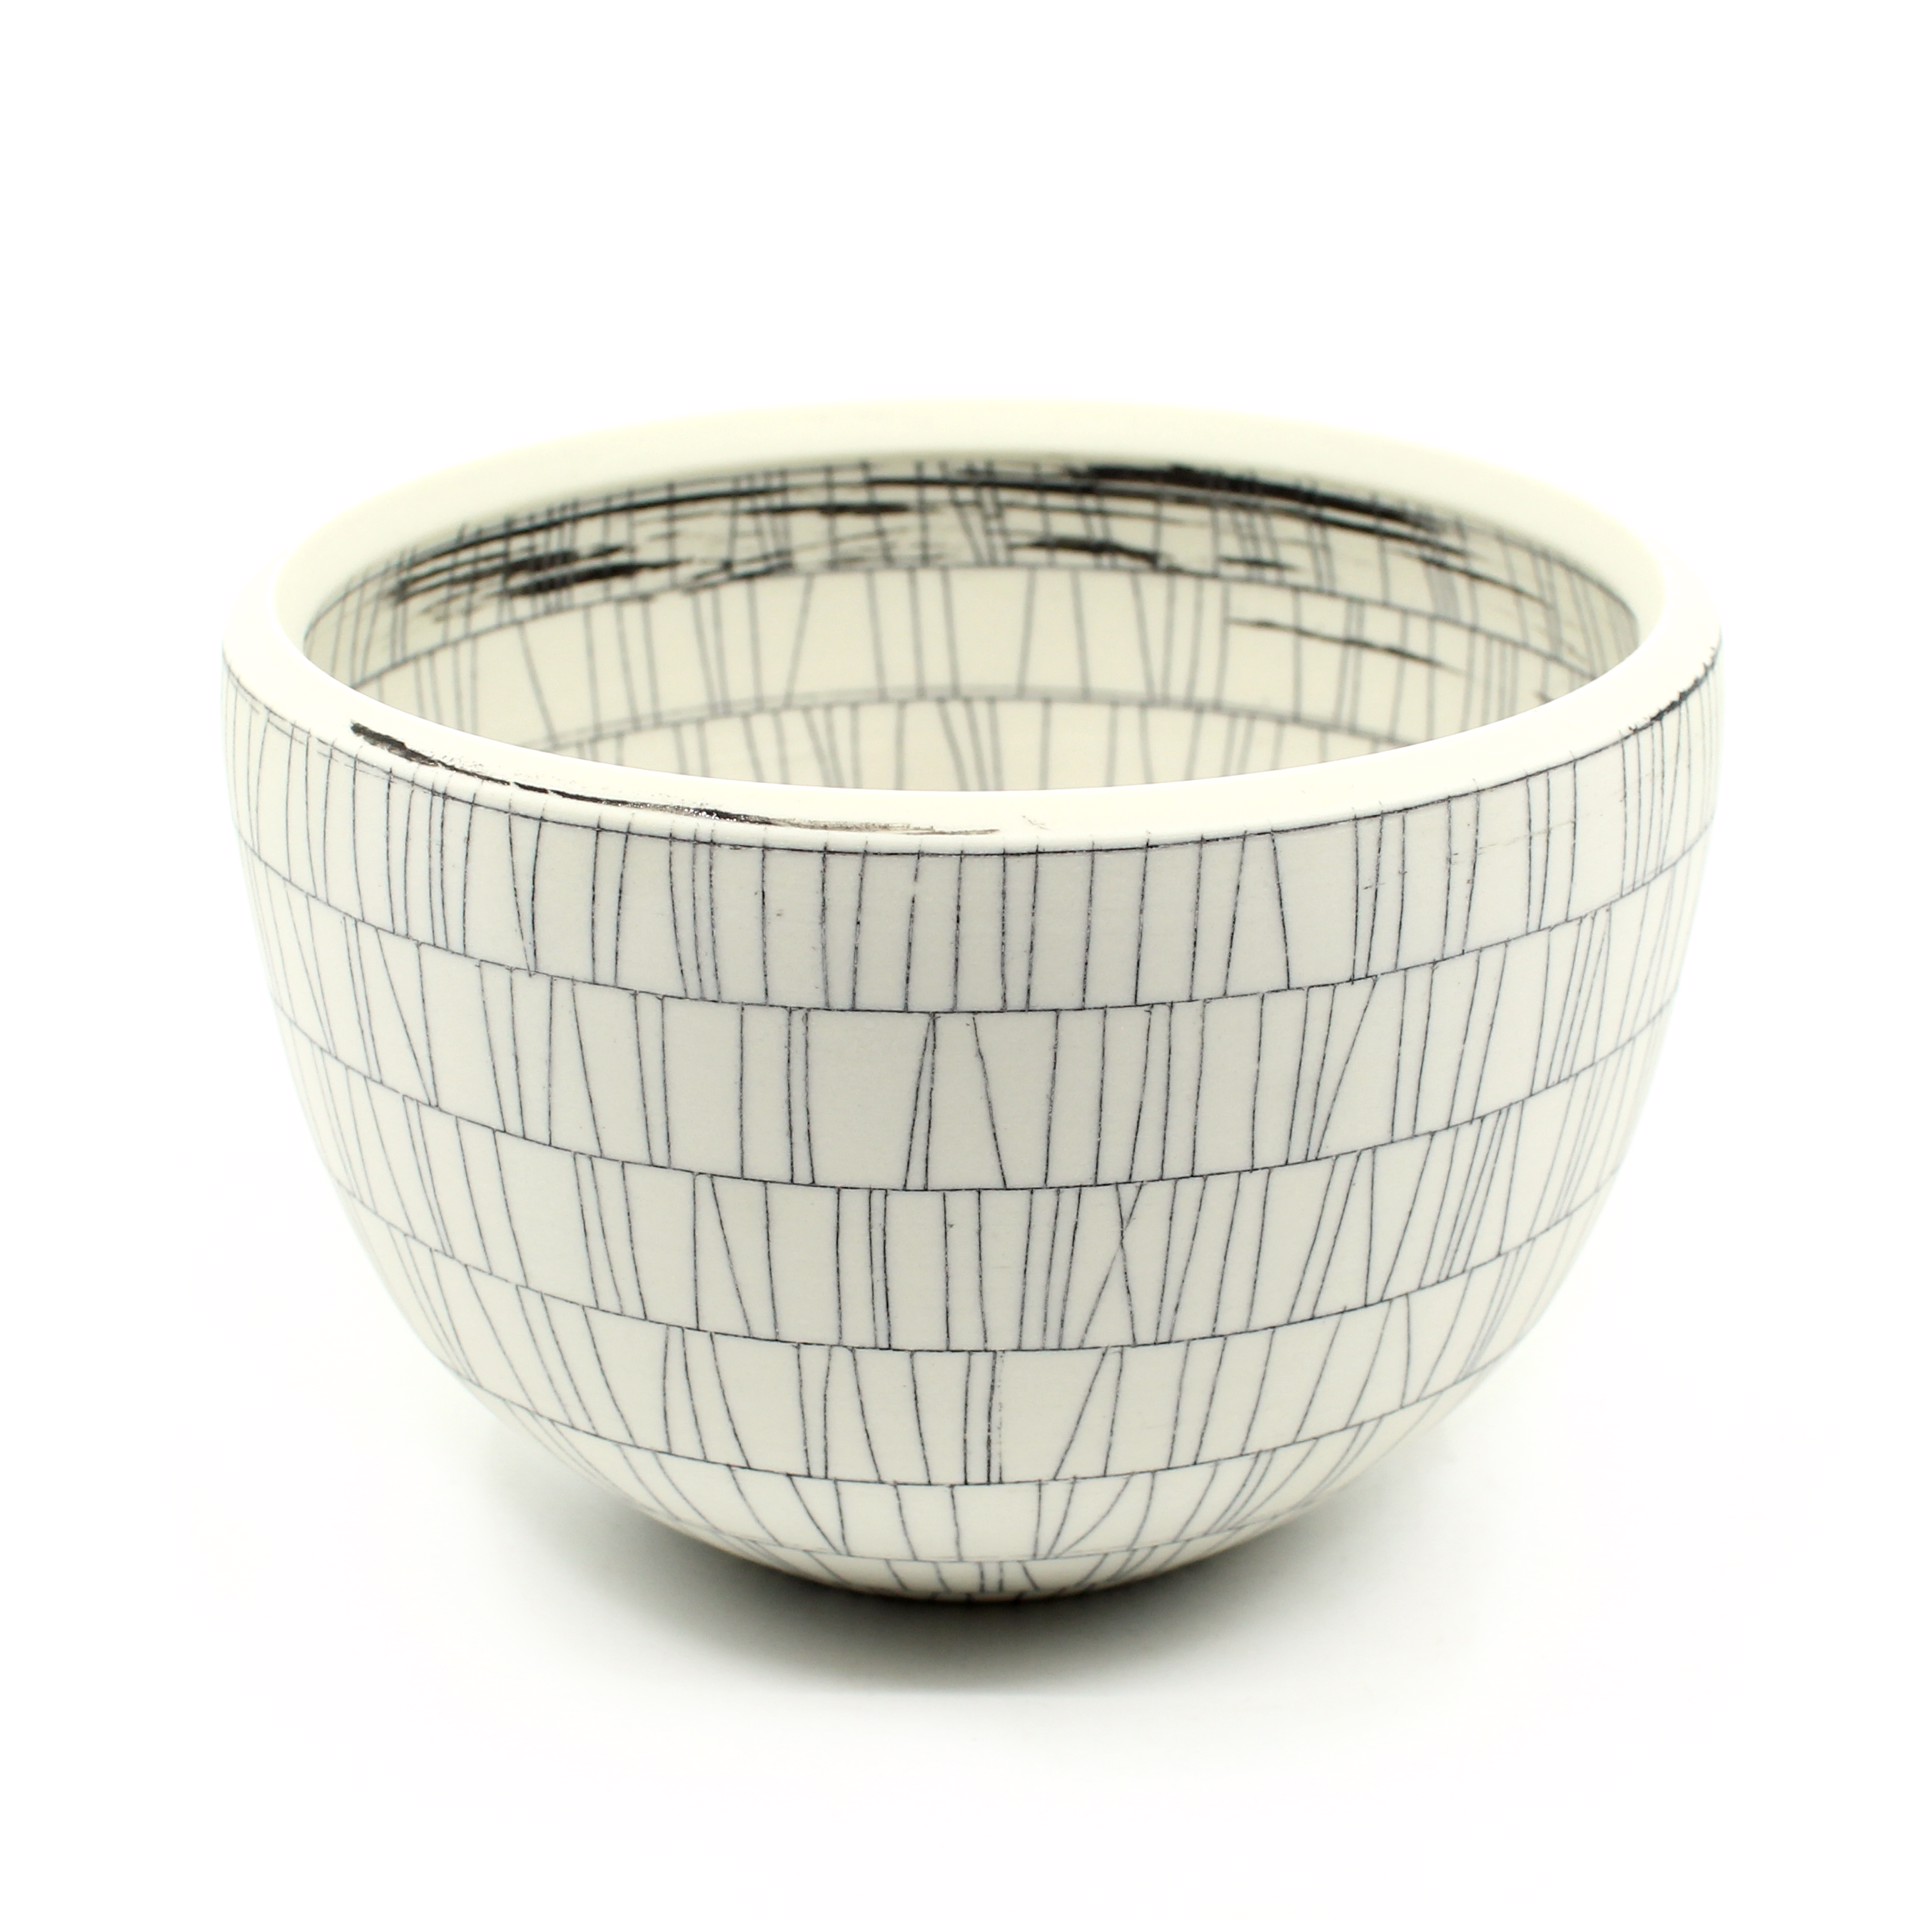 Small Line Bowl by Bianka Groves